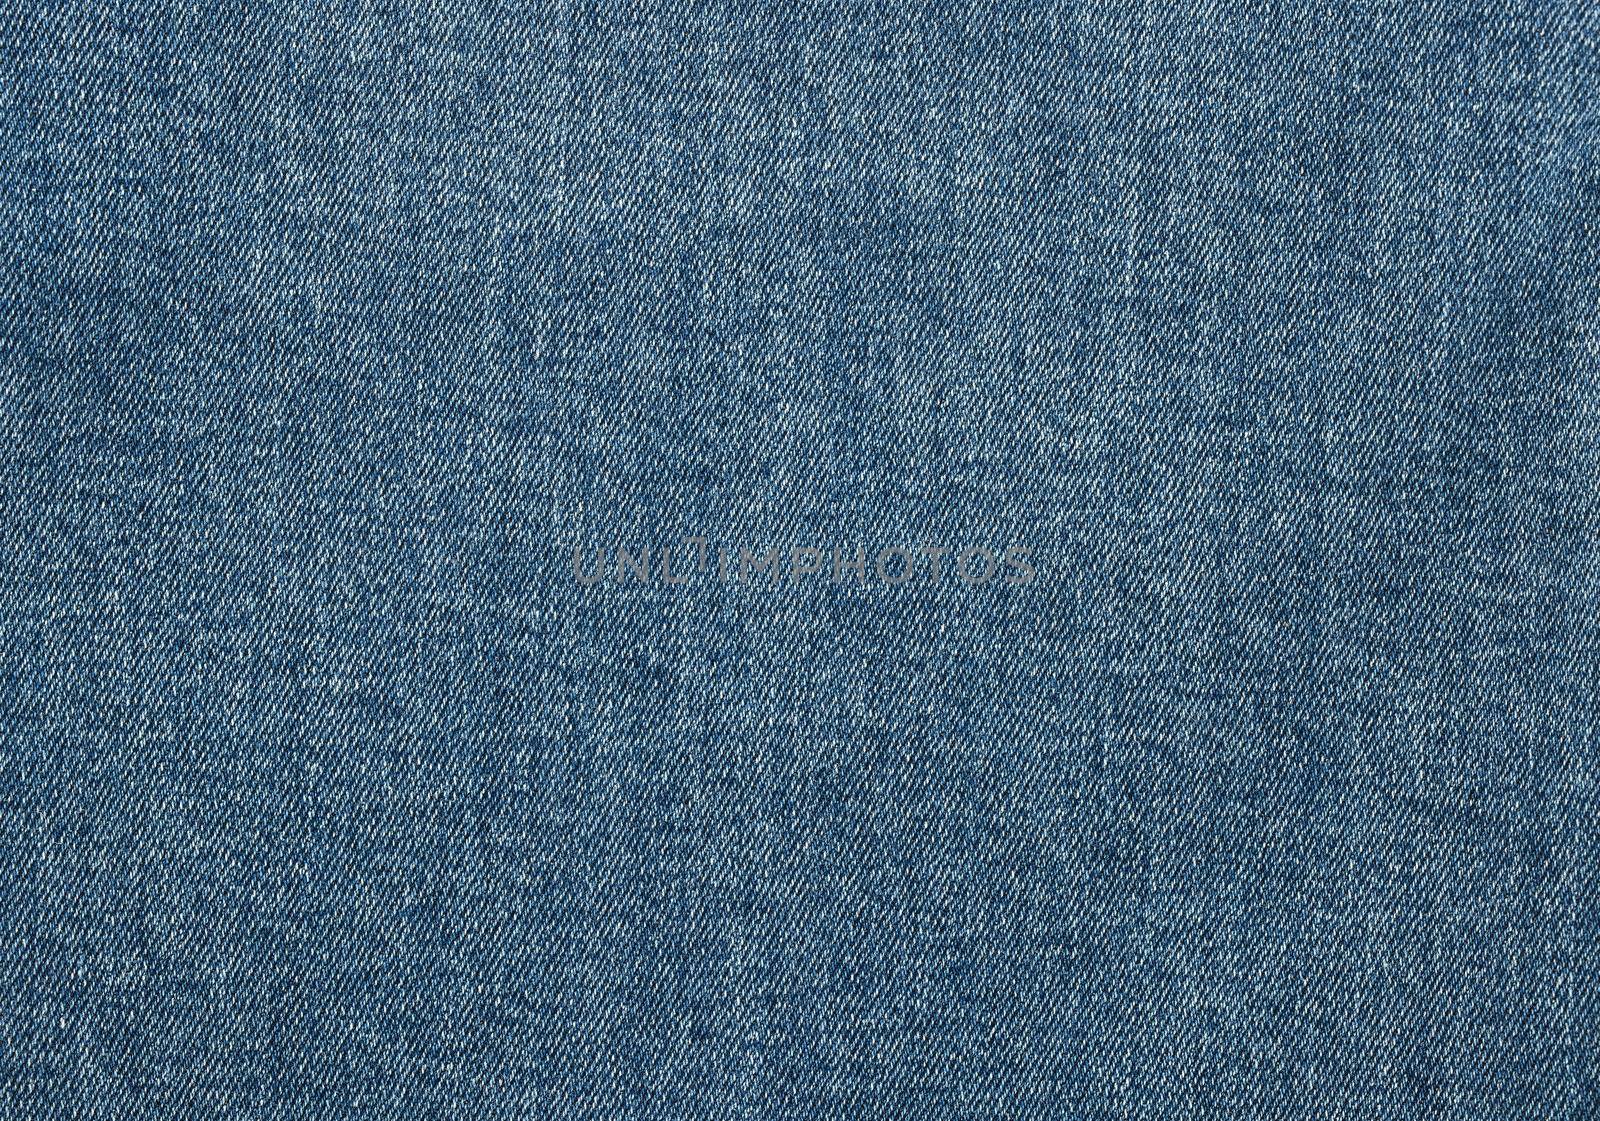 Blue jeans background and texture. Close up of blue jeans background. Denim texture.